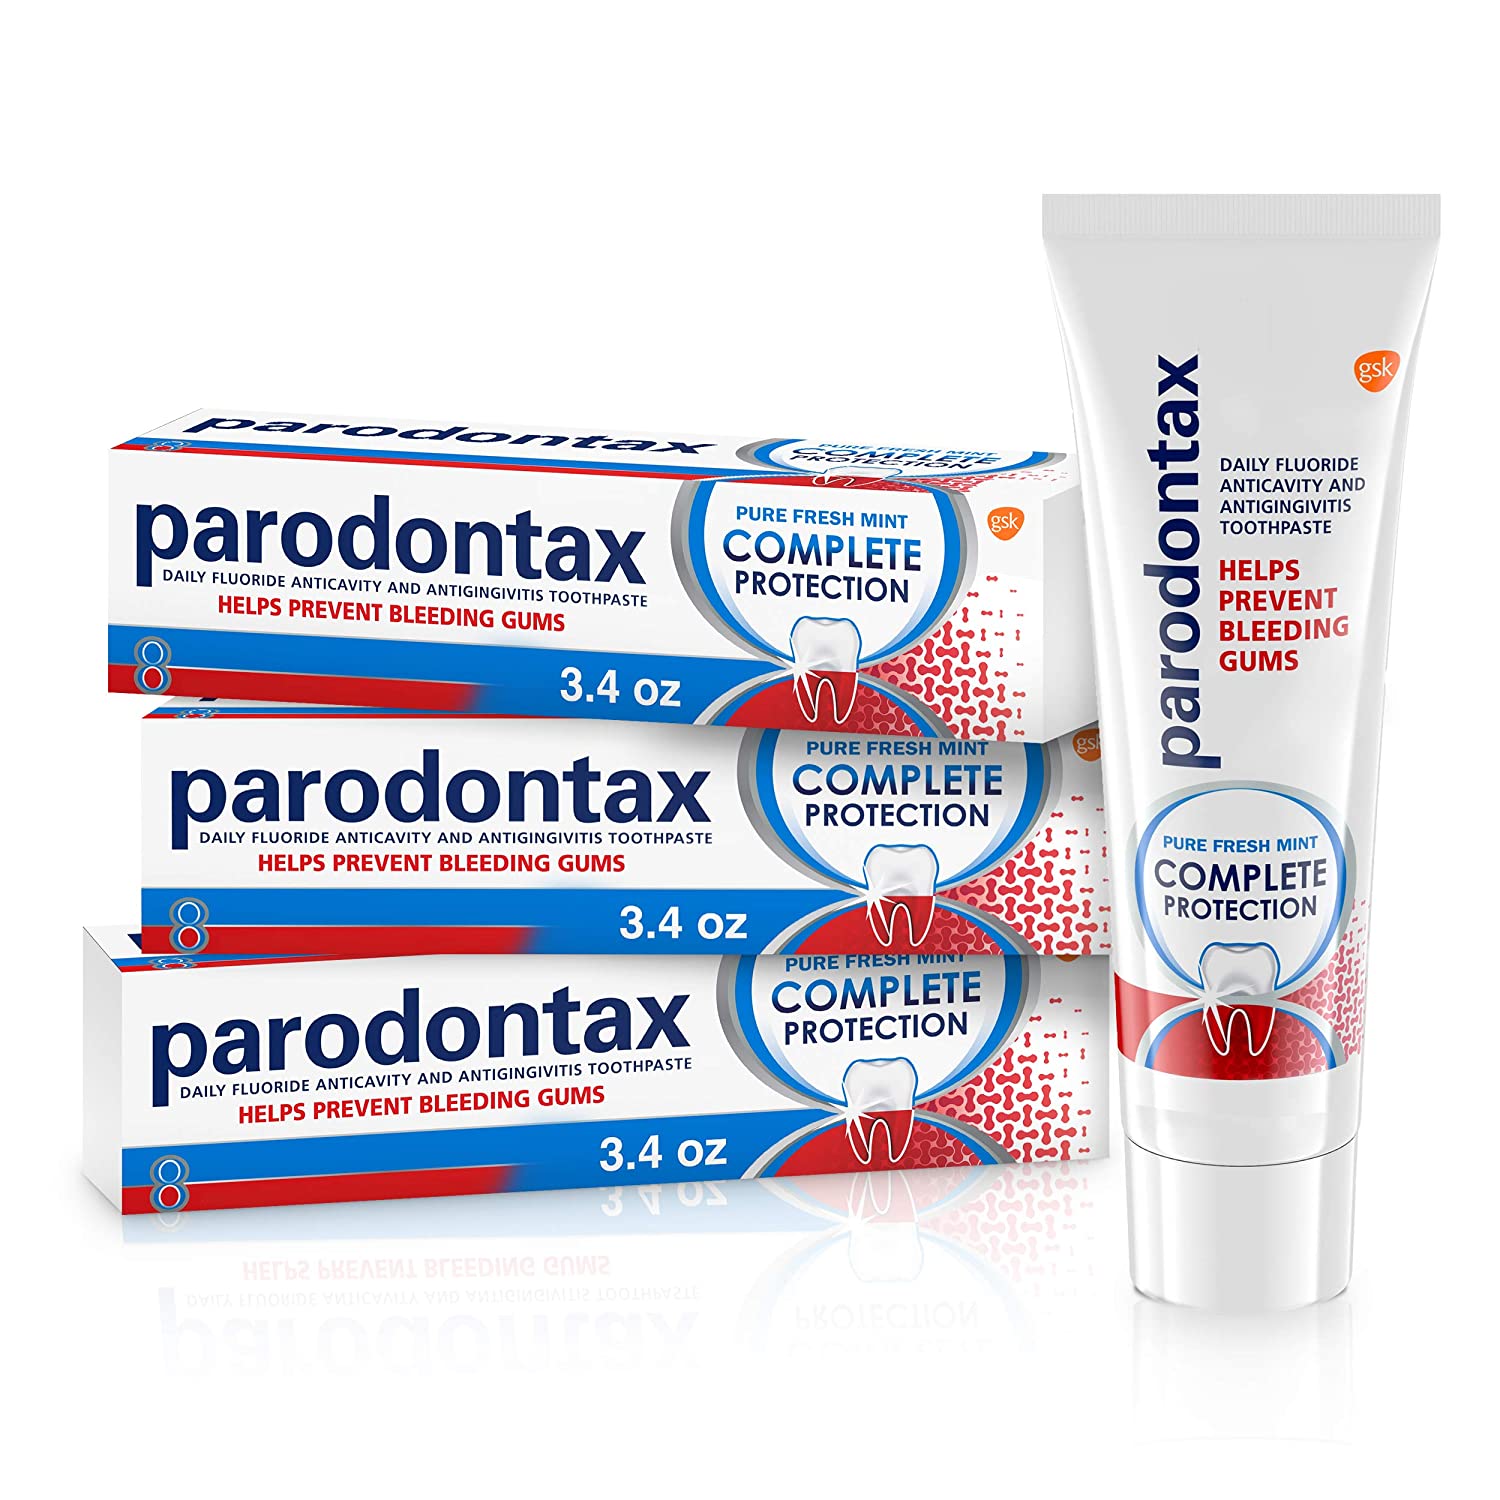 Parodontax Complete Protection Toothpaste for Bleeding Gums, Gingivitis